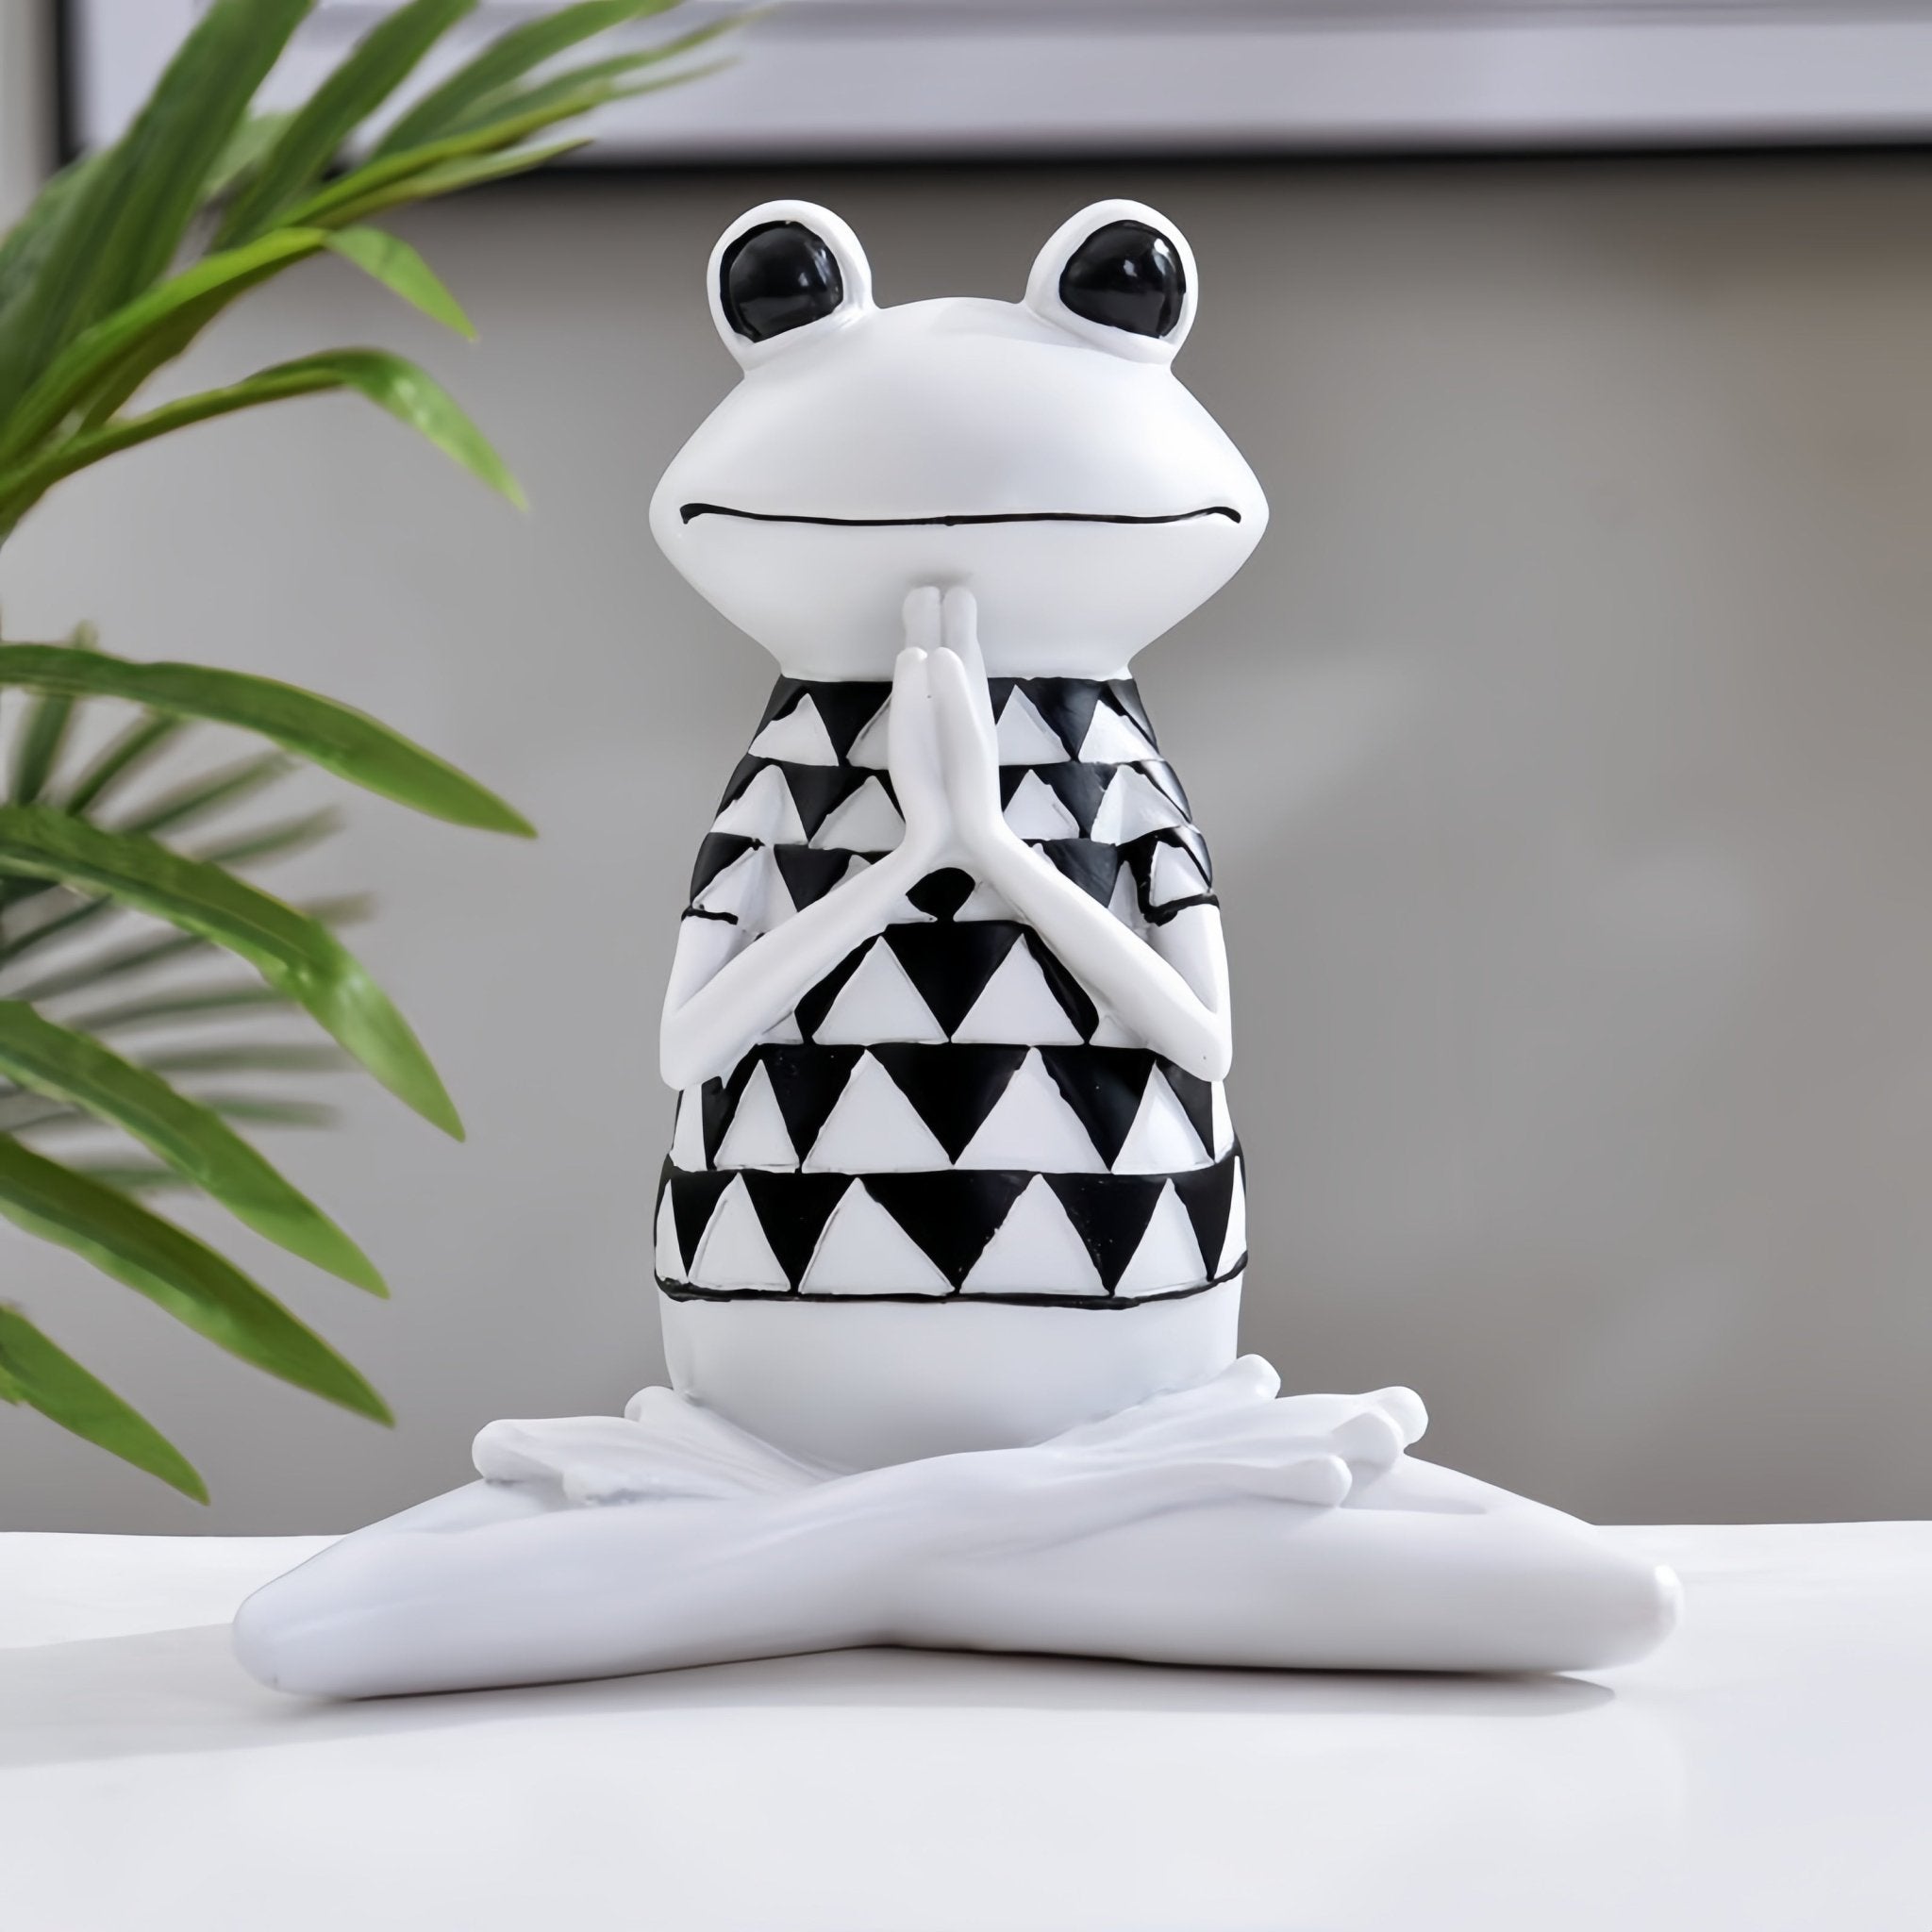 Close-up view of the Harmony Zen Frog Statue in hands-together pose, showing details and geometric patterns.